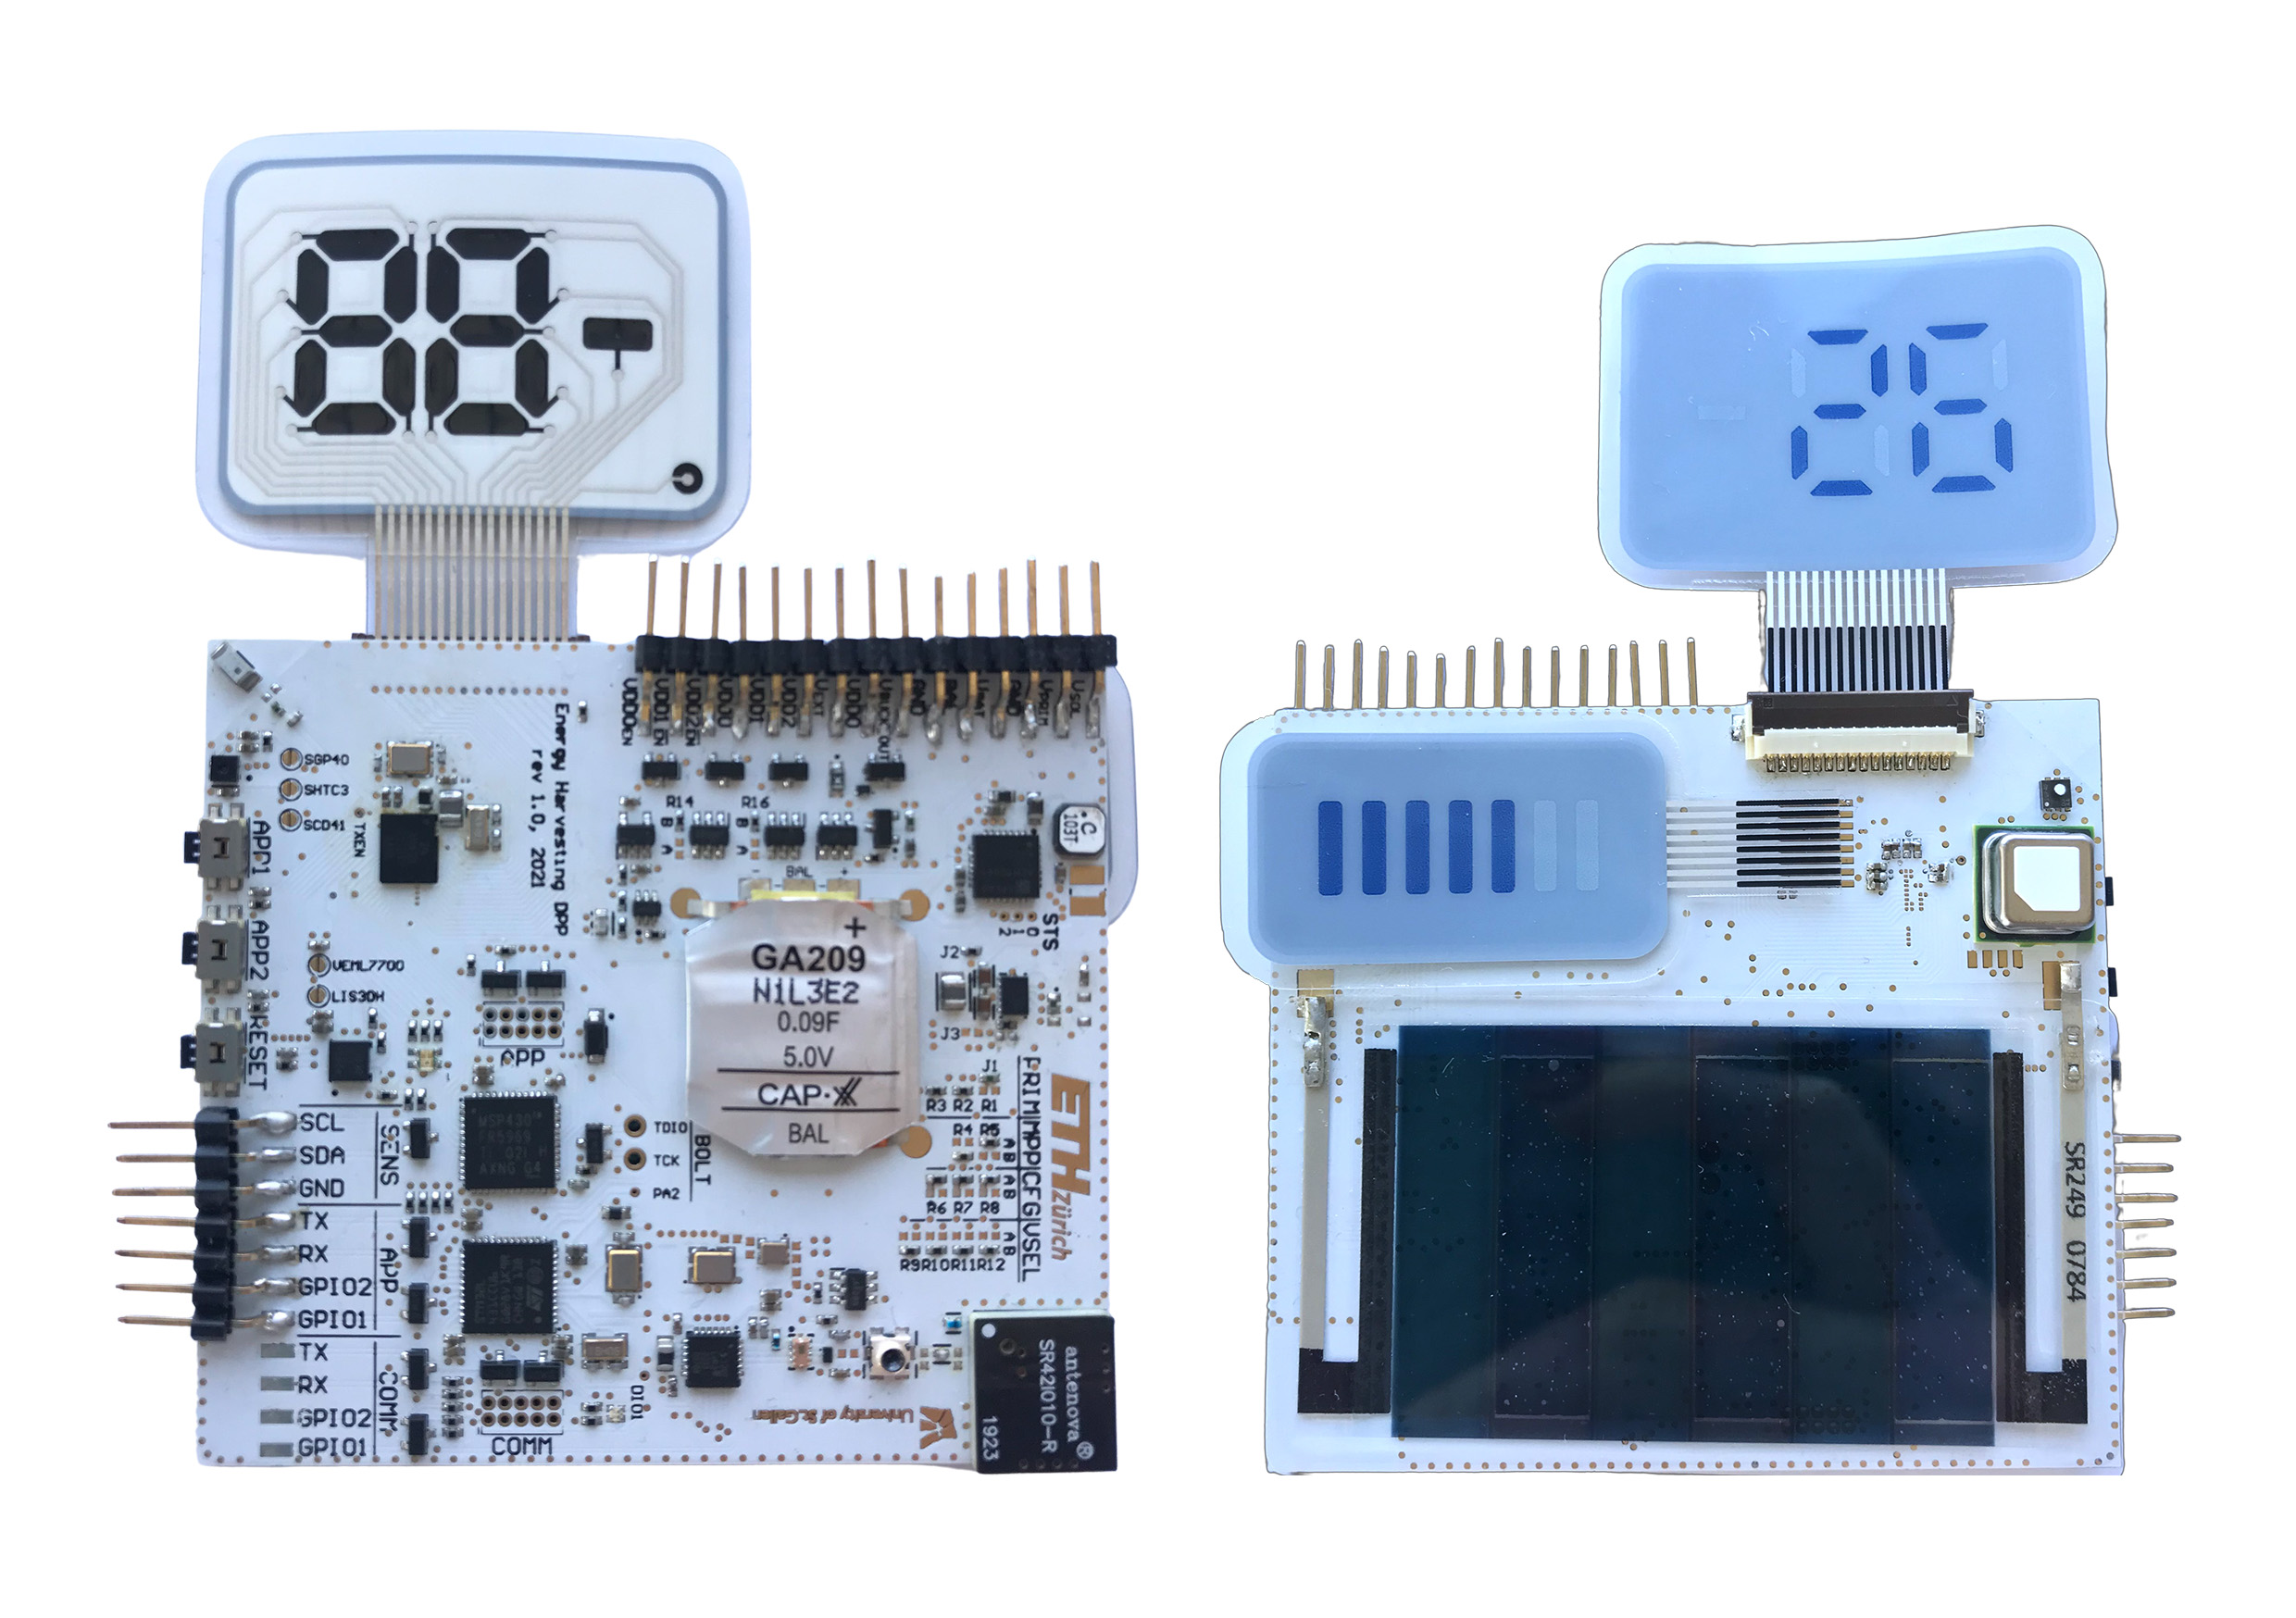 The DPP3e is an energy harvesting IoT node designed for indoor applications.